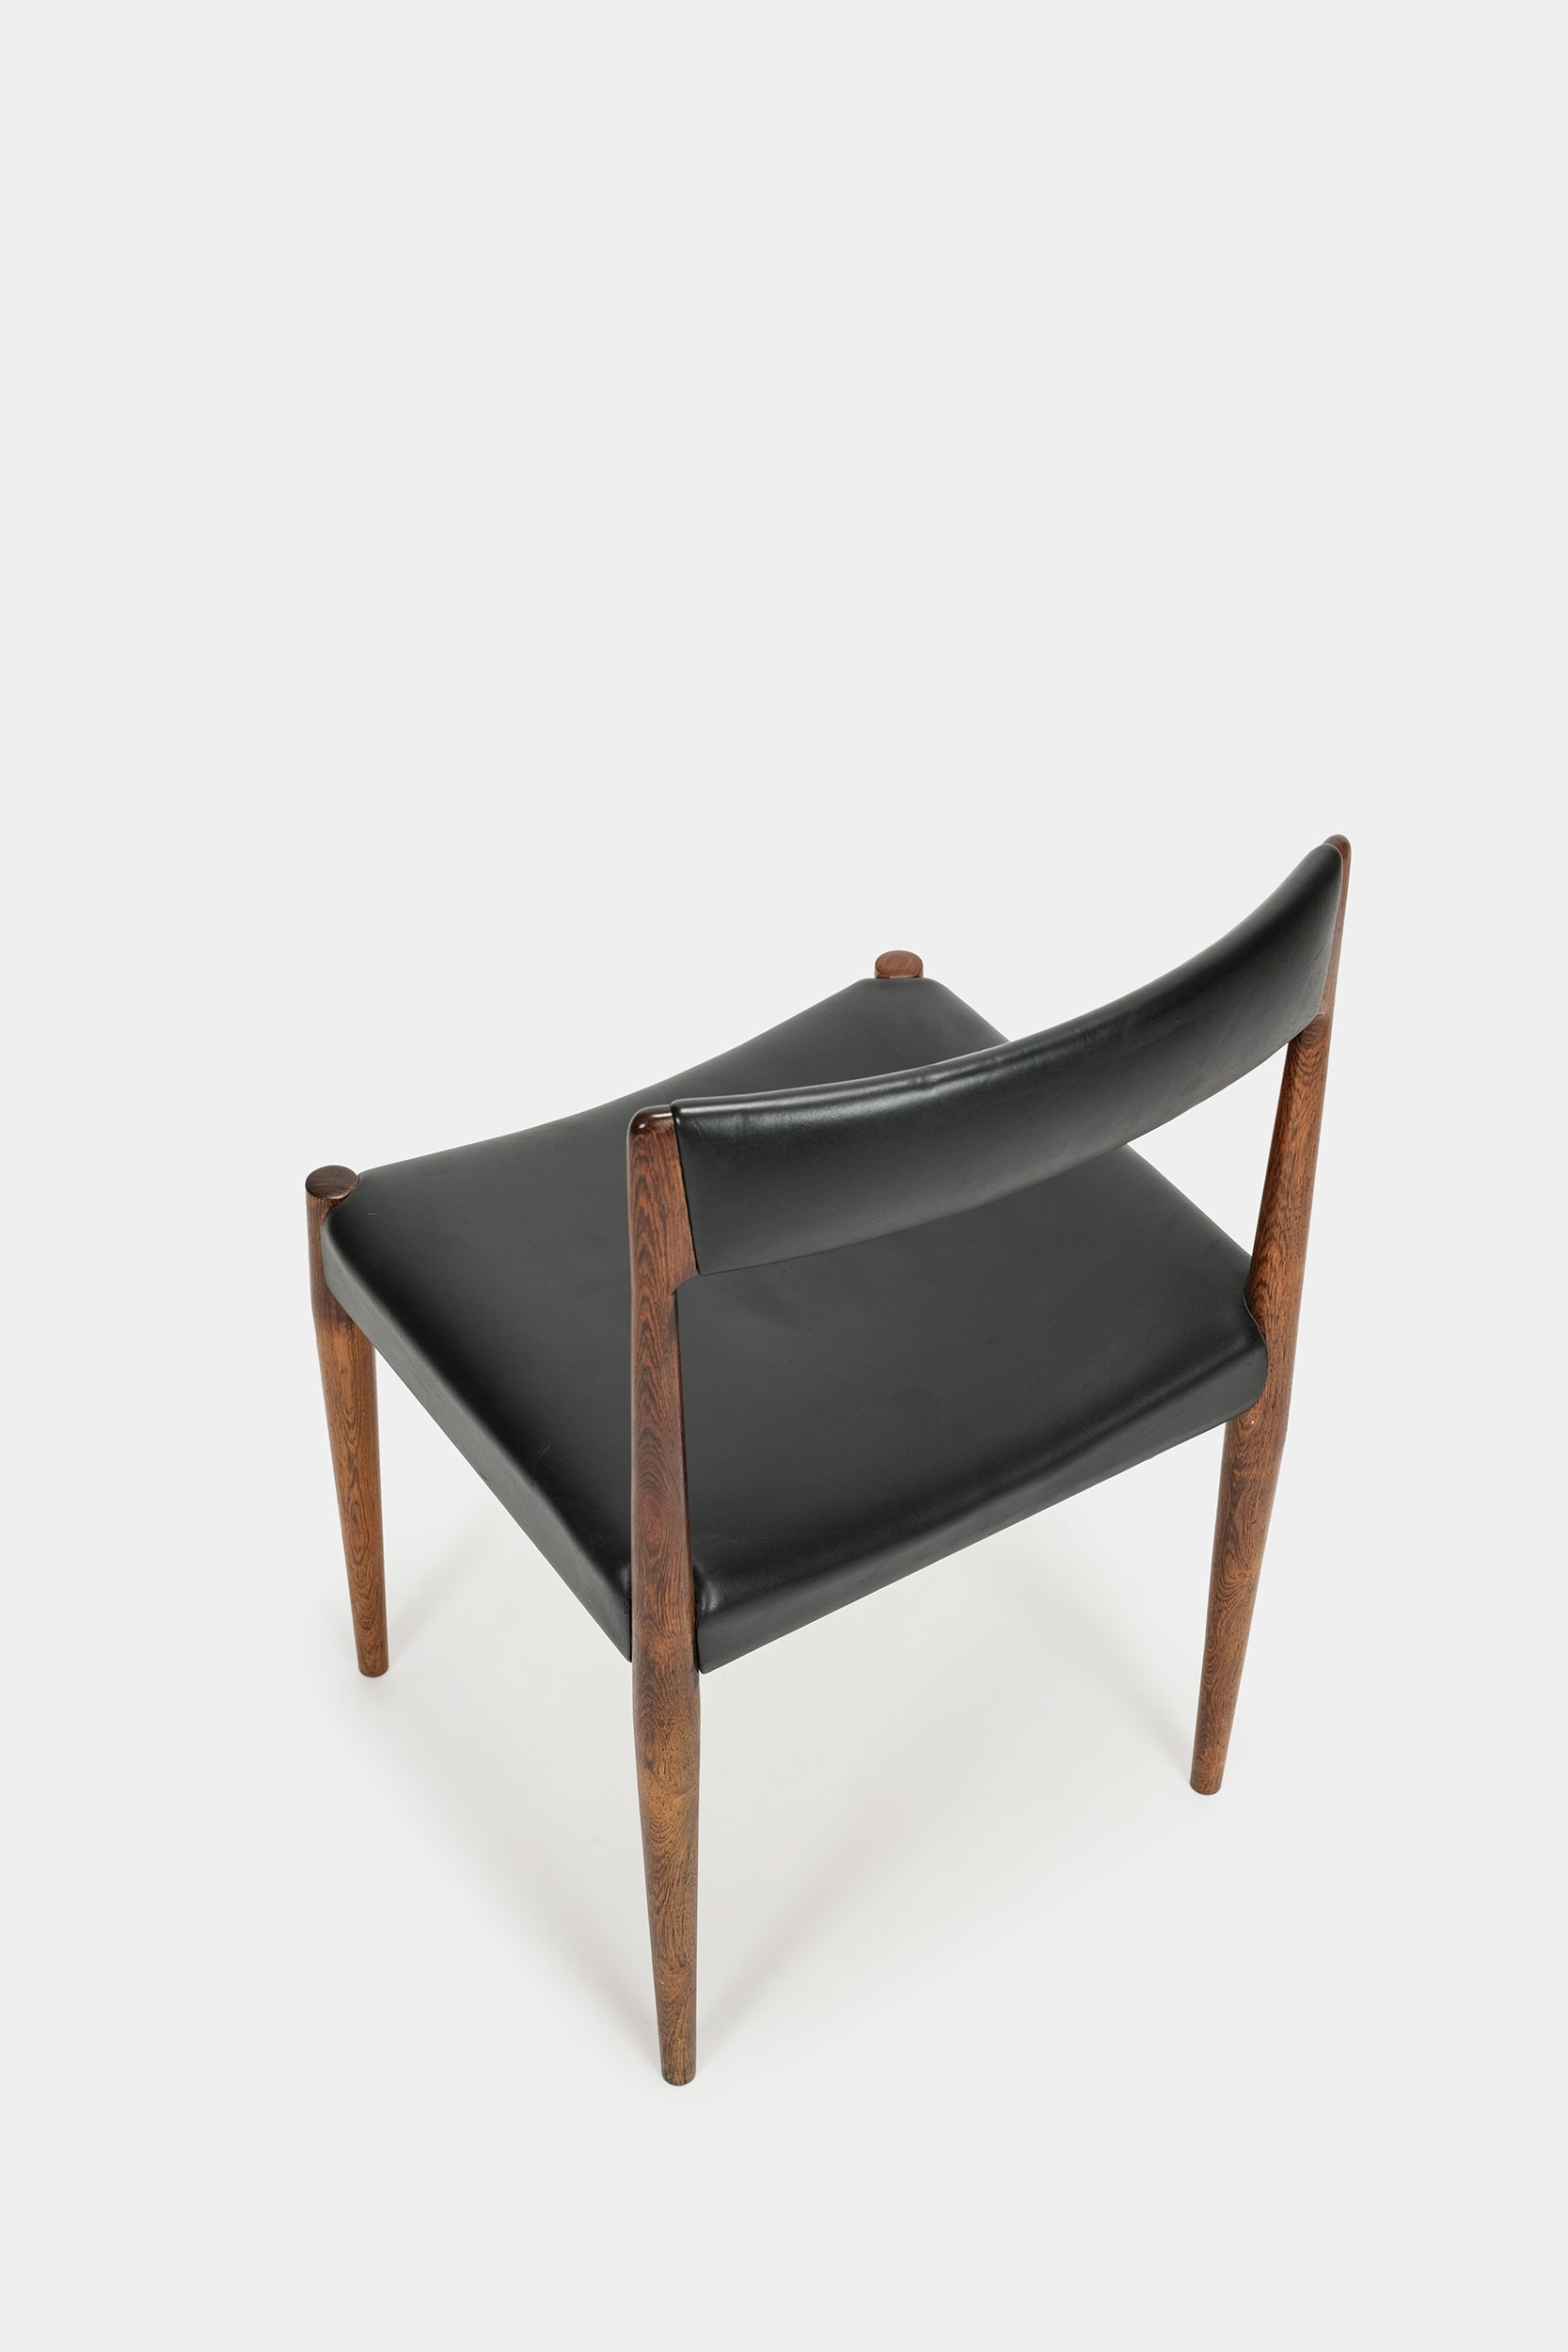 Danish rosewood chair 60s with black leather